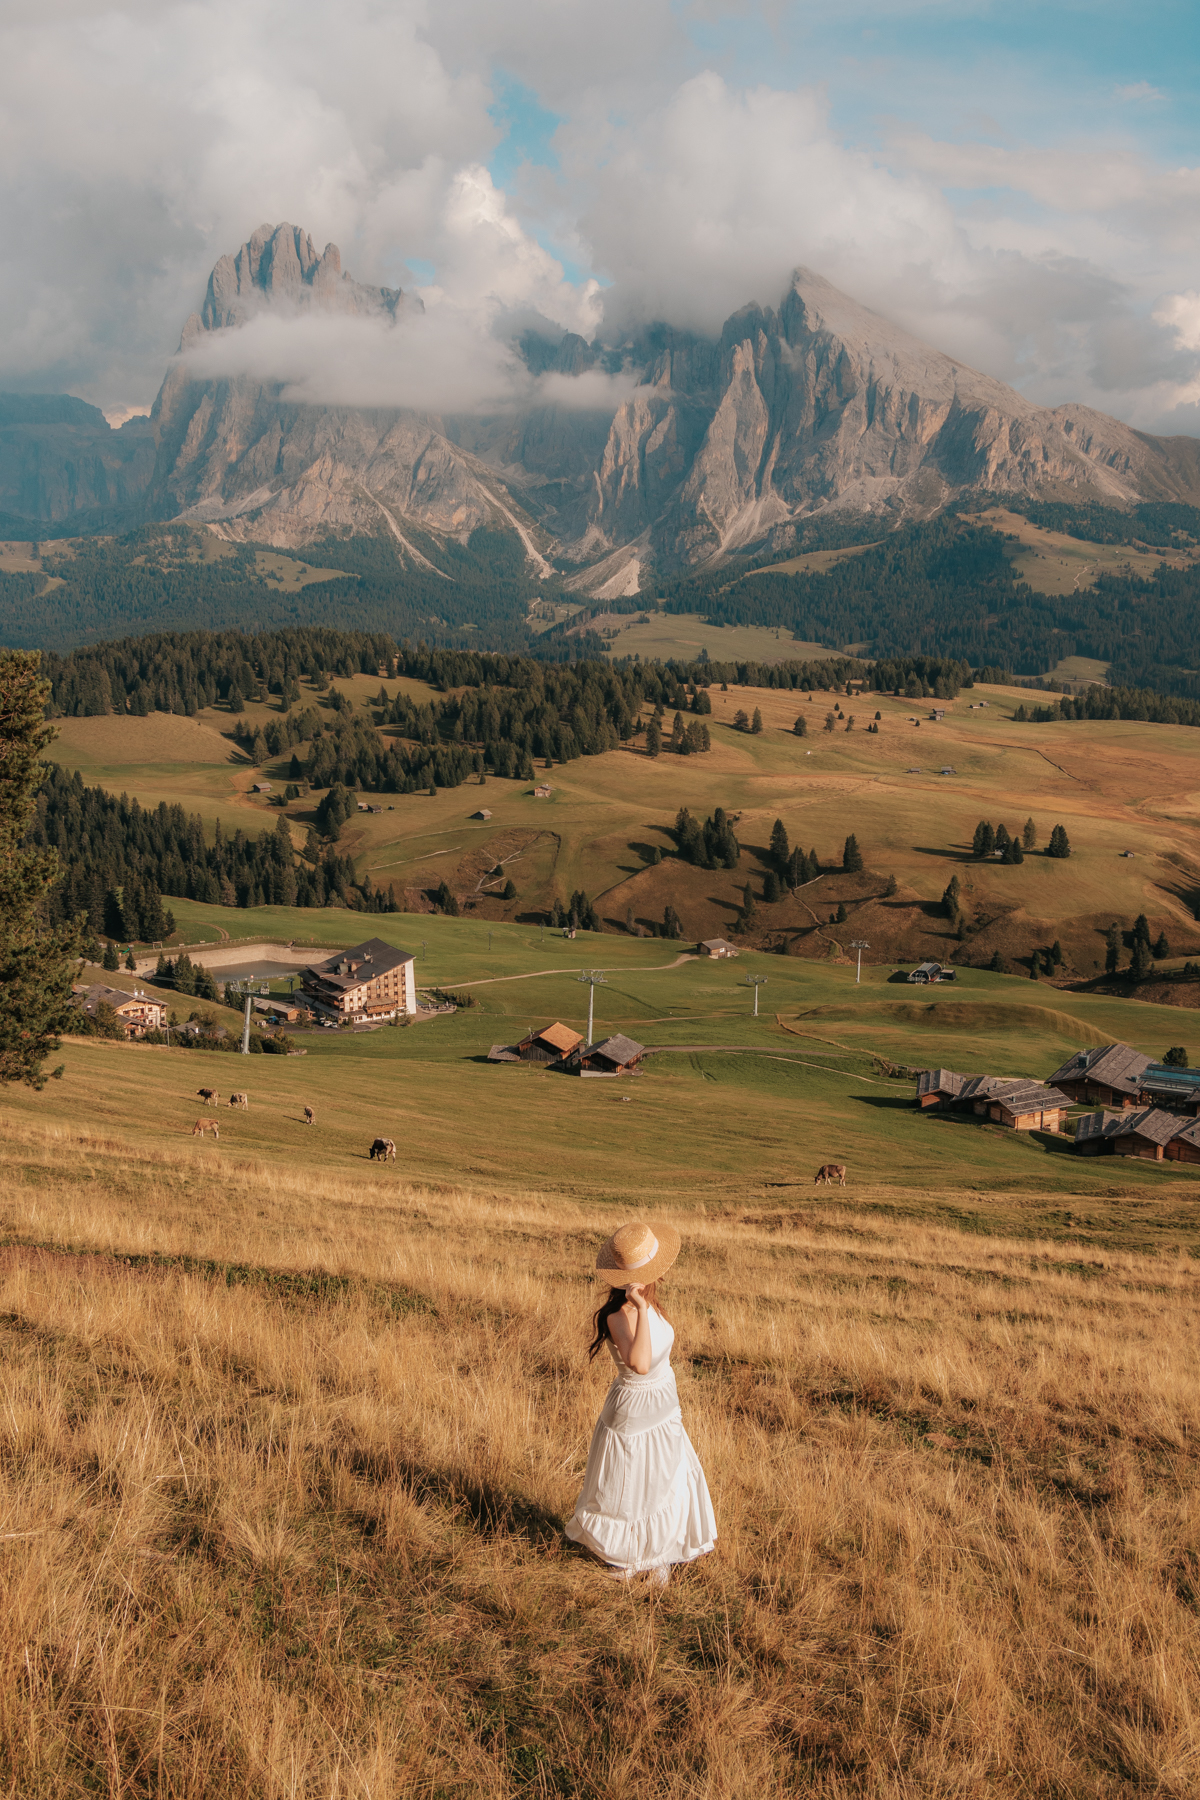 Alpe di Siusi: How to Best Visit The Most Spectacular Place in The Dolomites